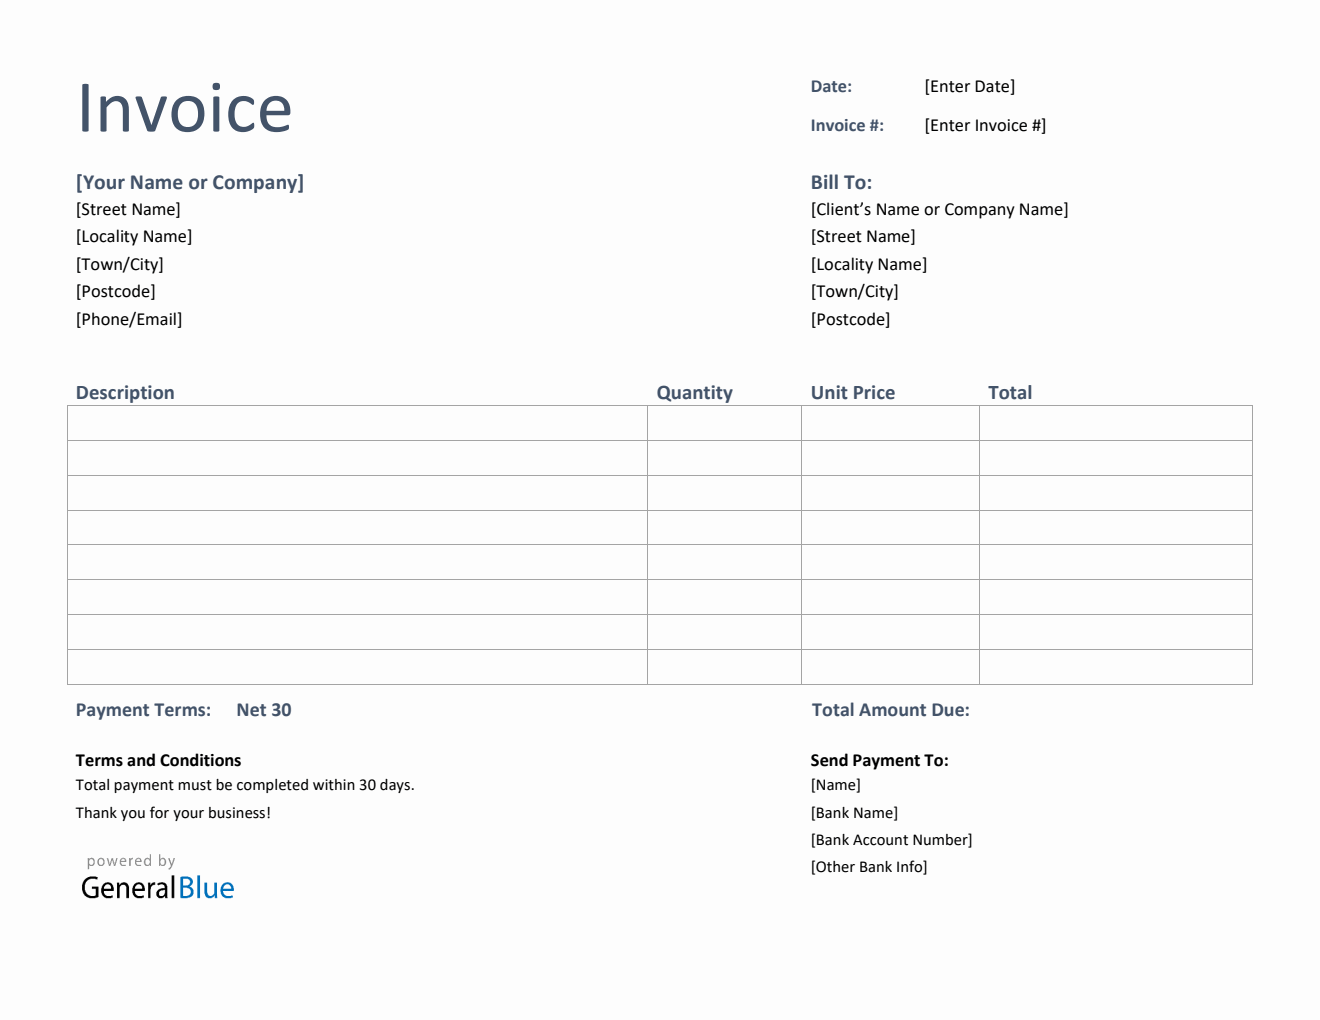 create a simple invoice in word